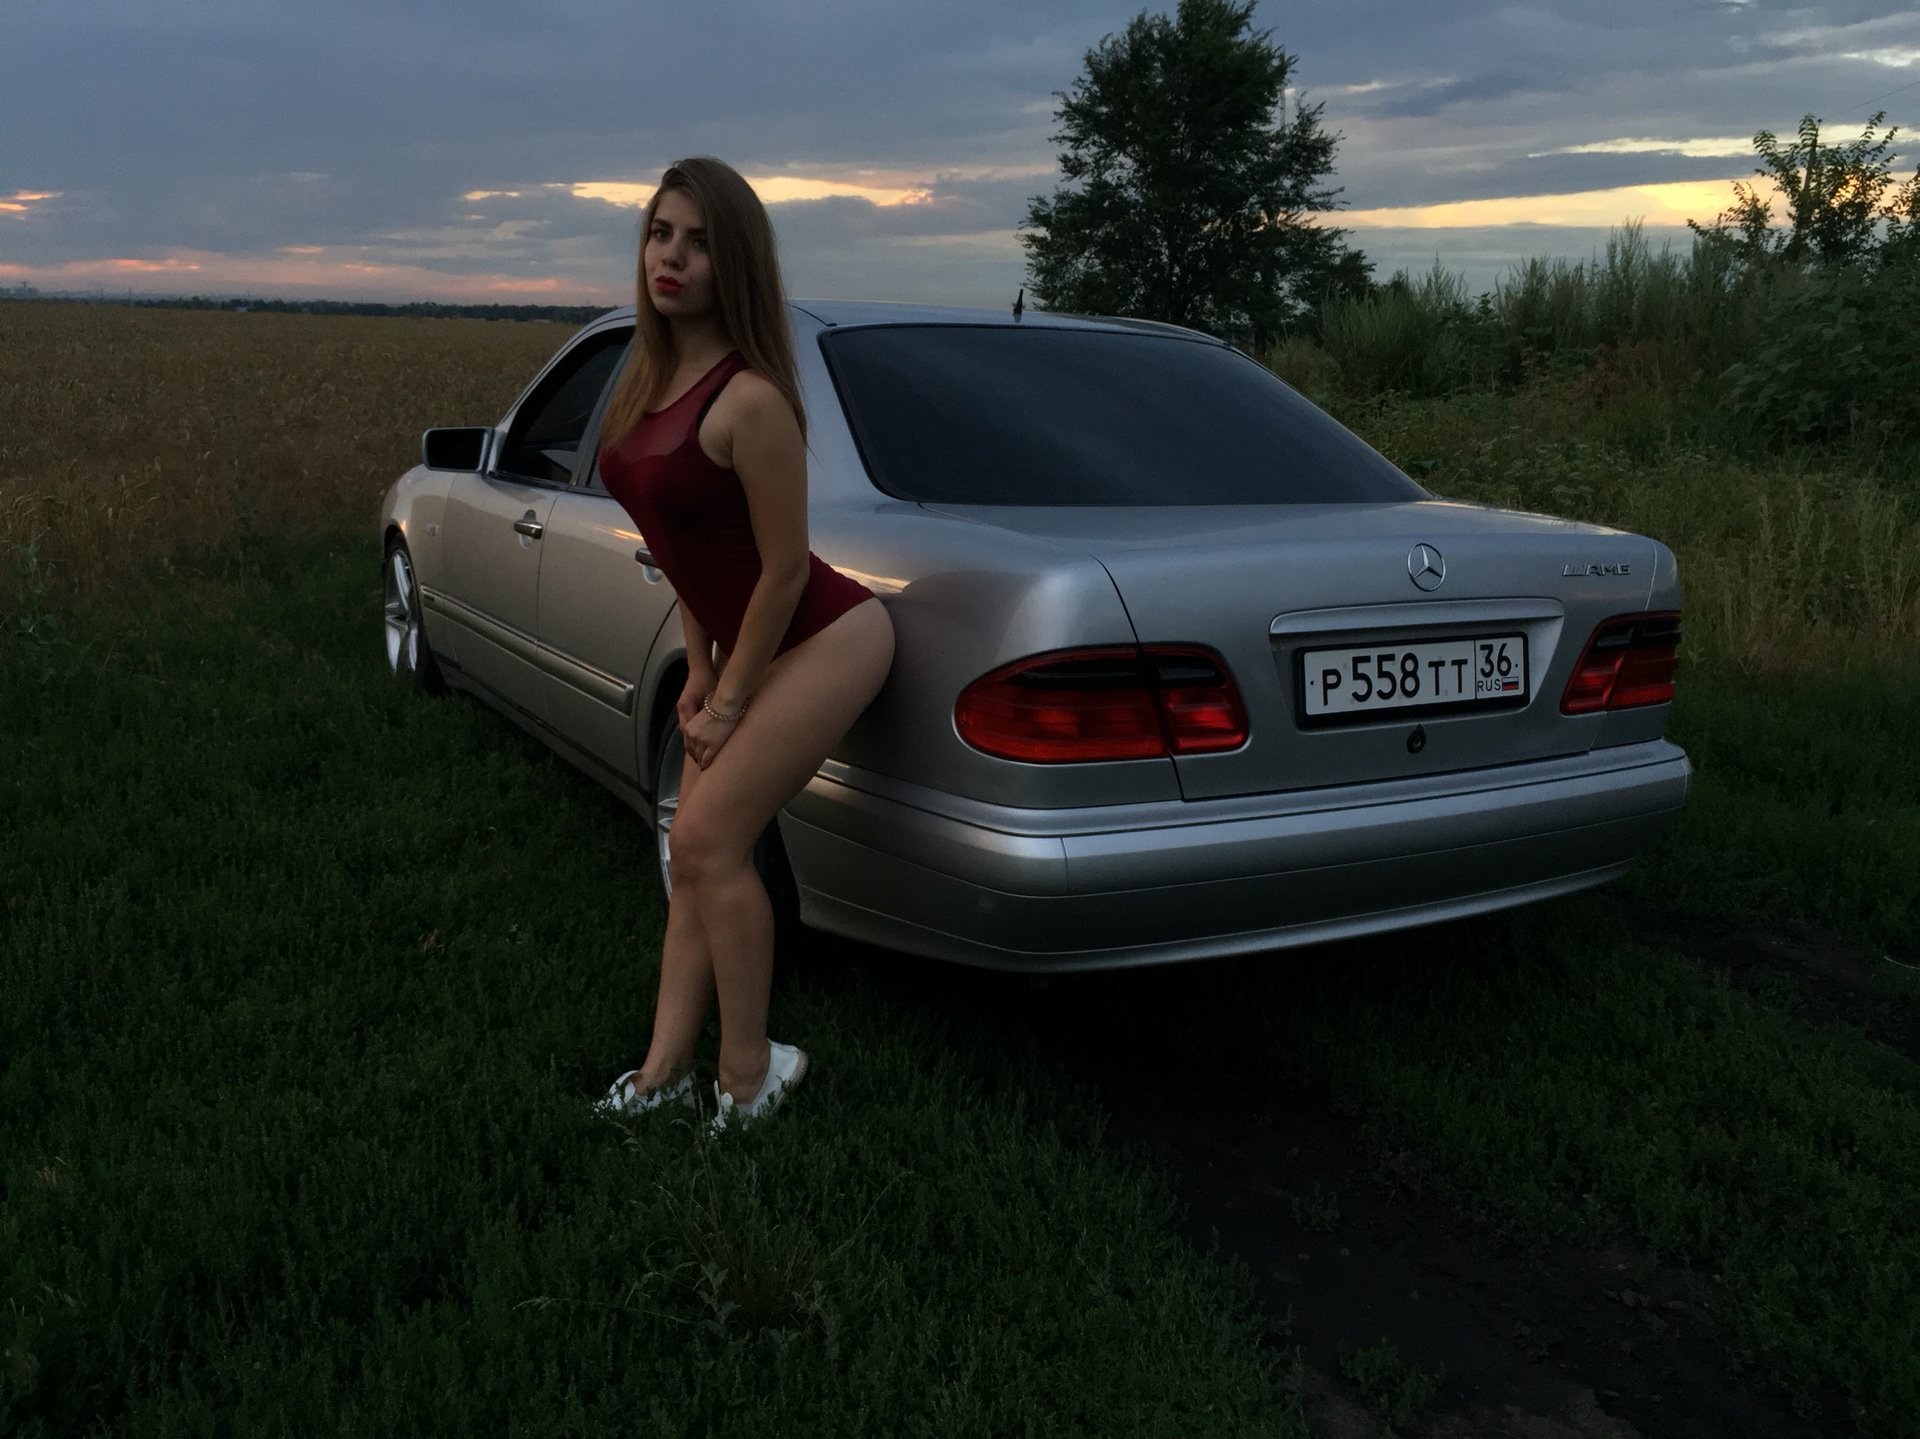 Indulge in the Passionate Splendor of the Mercedes Benz E300 in this Gallery